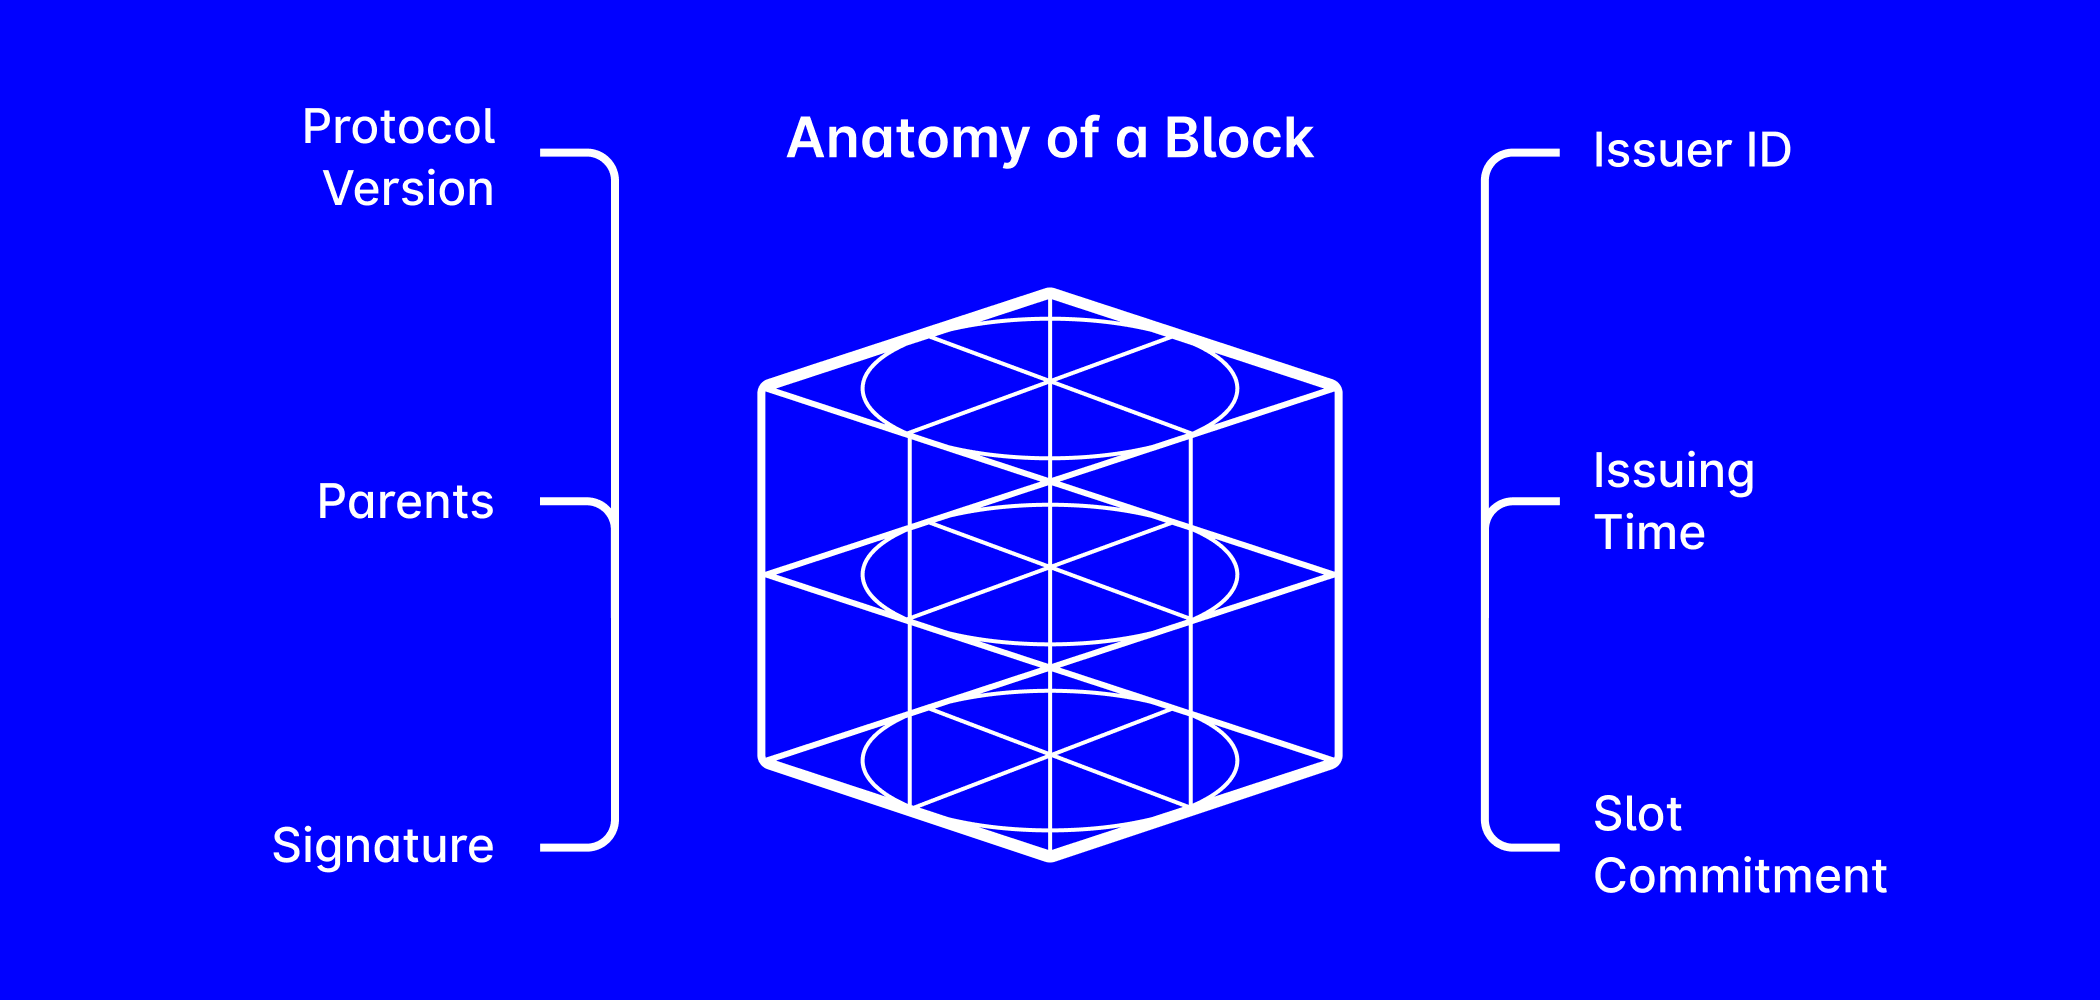 The anatomy of a block